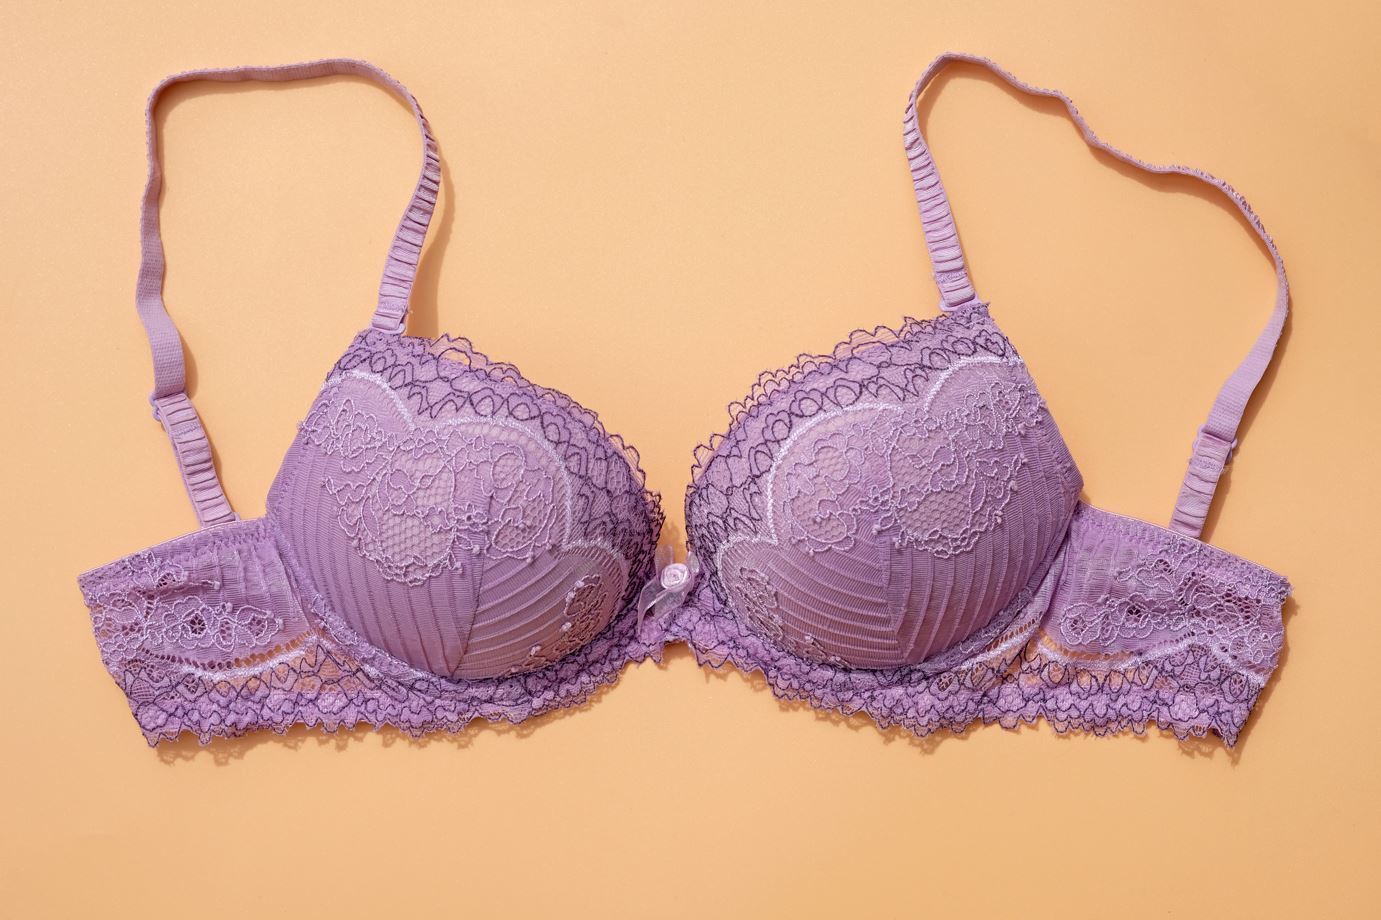 Bras Linked to Breast Cancer: Are Lawsuits Inevitable?